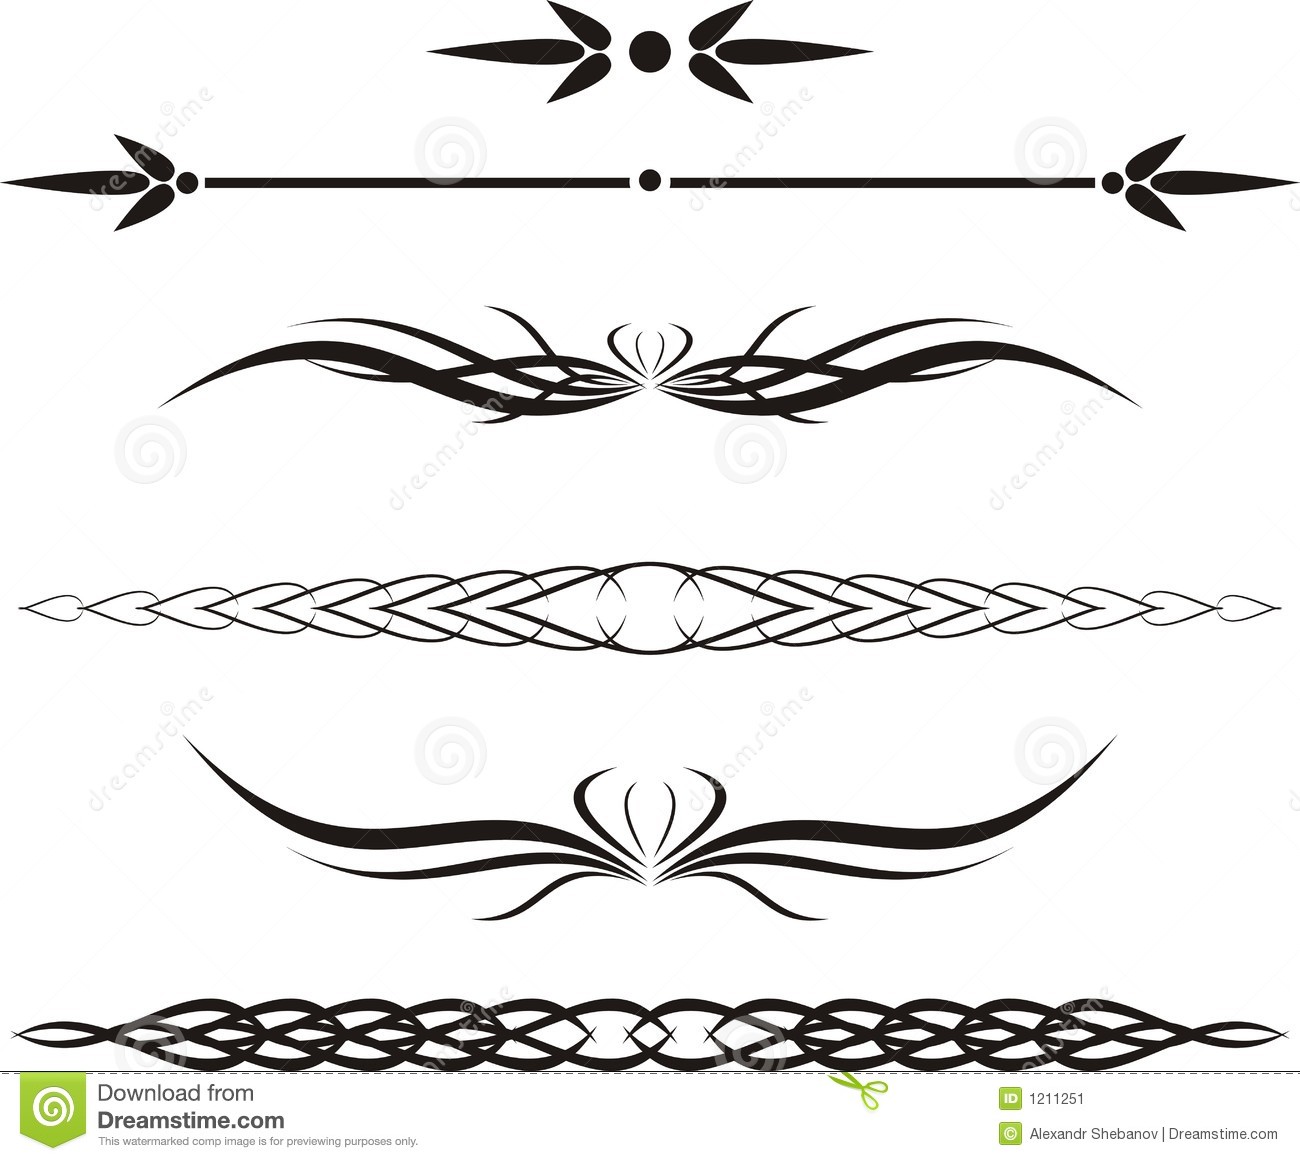 Decorative Scroll Clipart   Free Clip Art Images